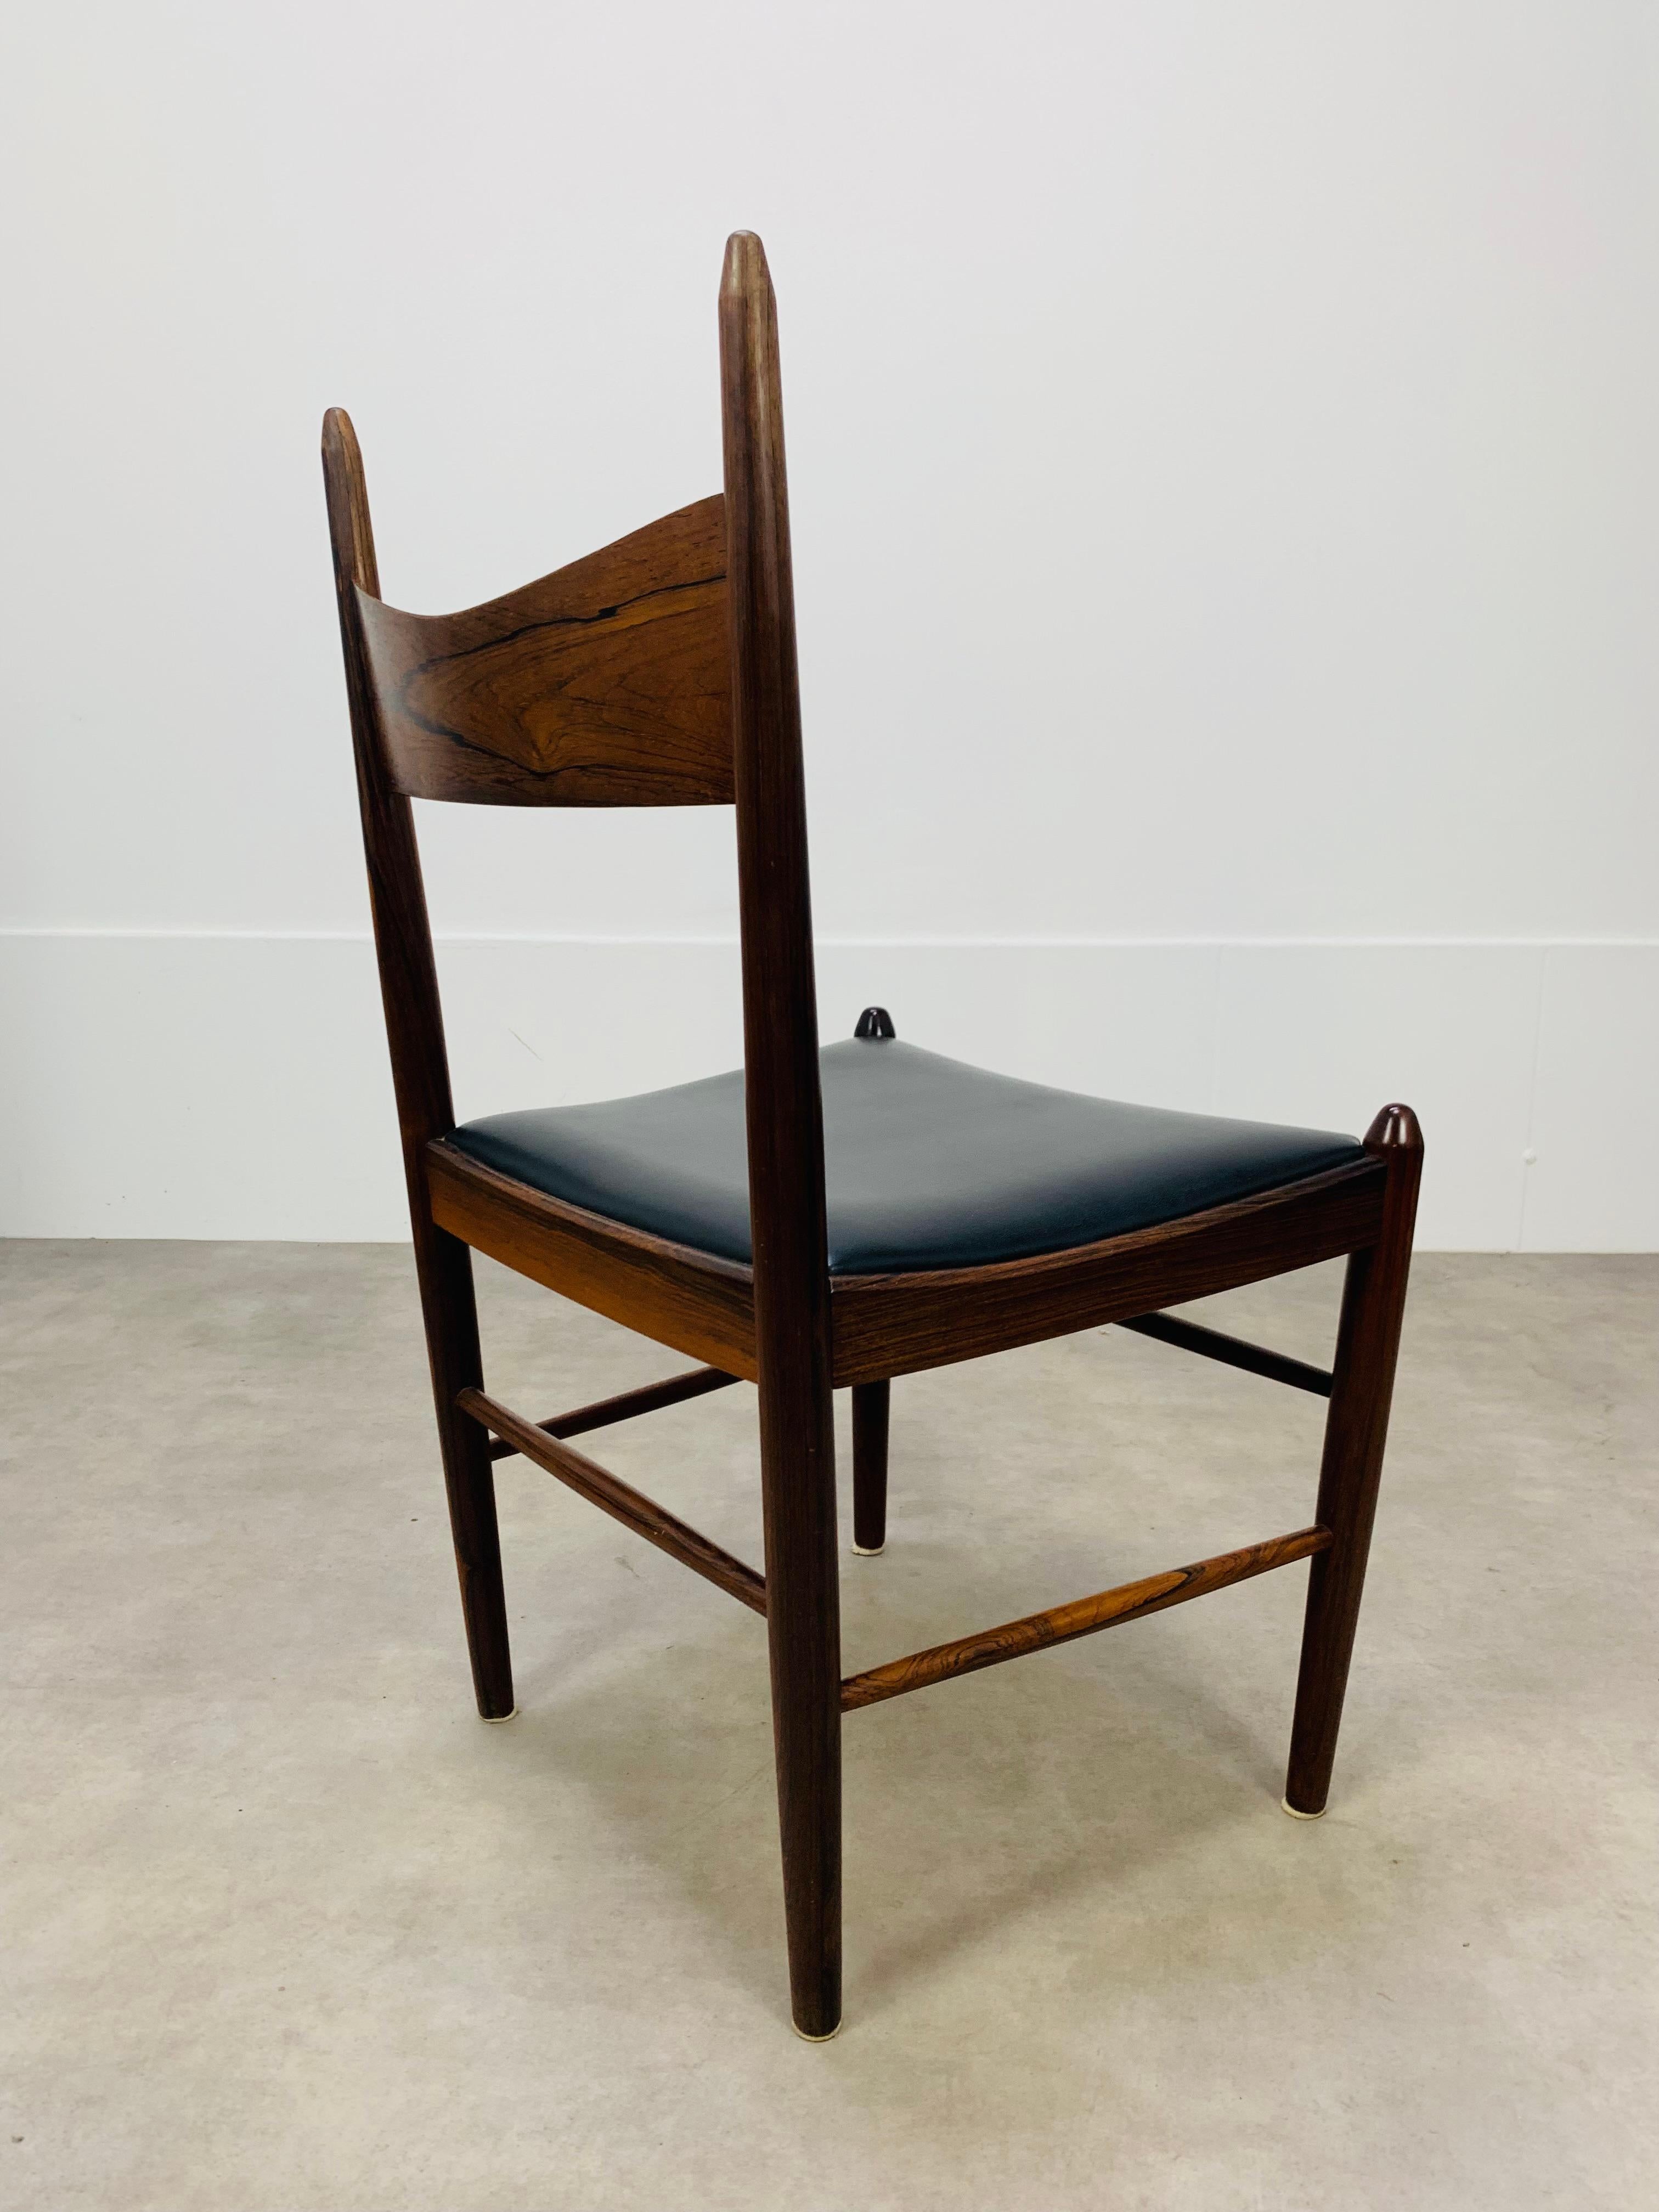 4 Scandinavian Rosewood Chairs by Vestervig Eriksen for Tomborg, 1960 For Sale 2